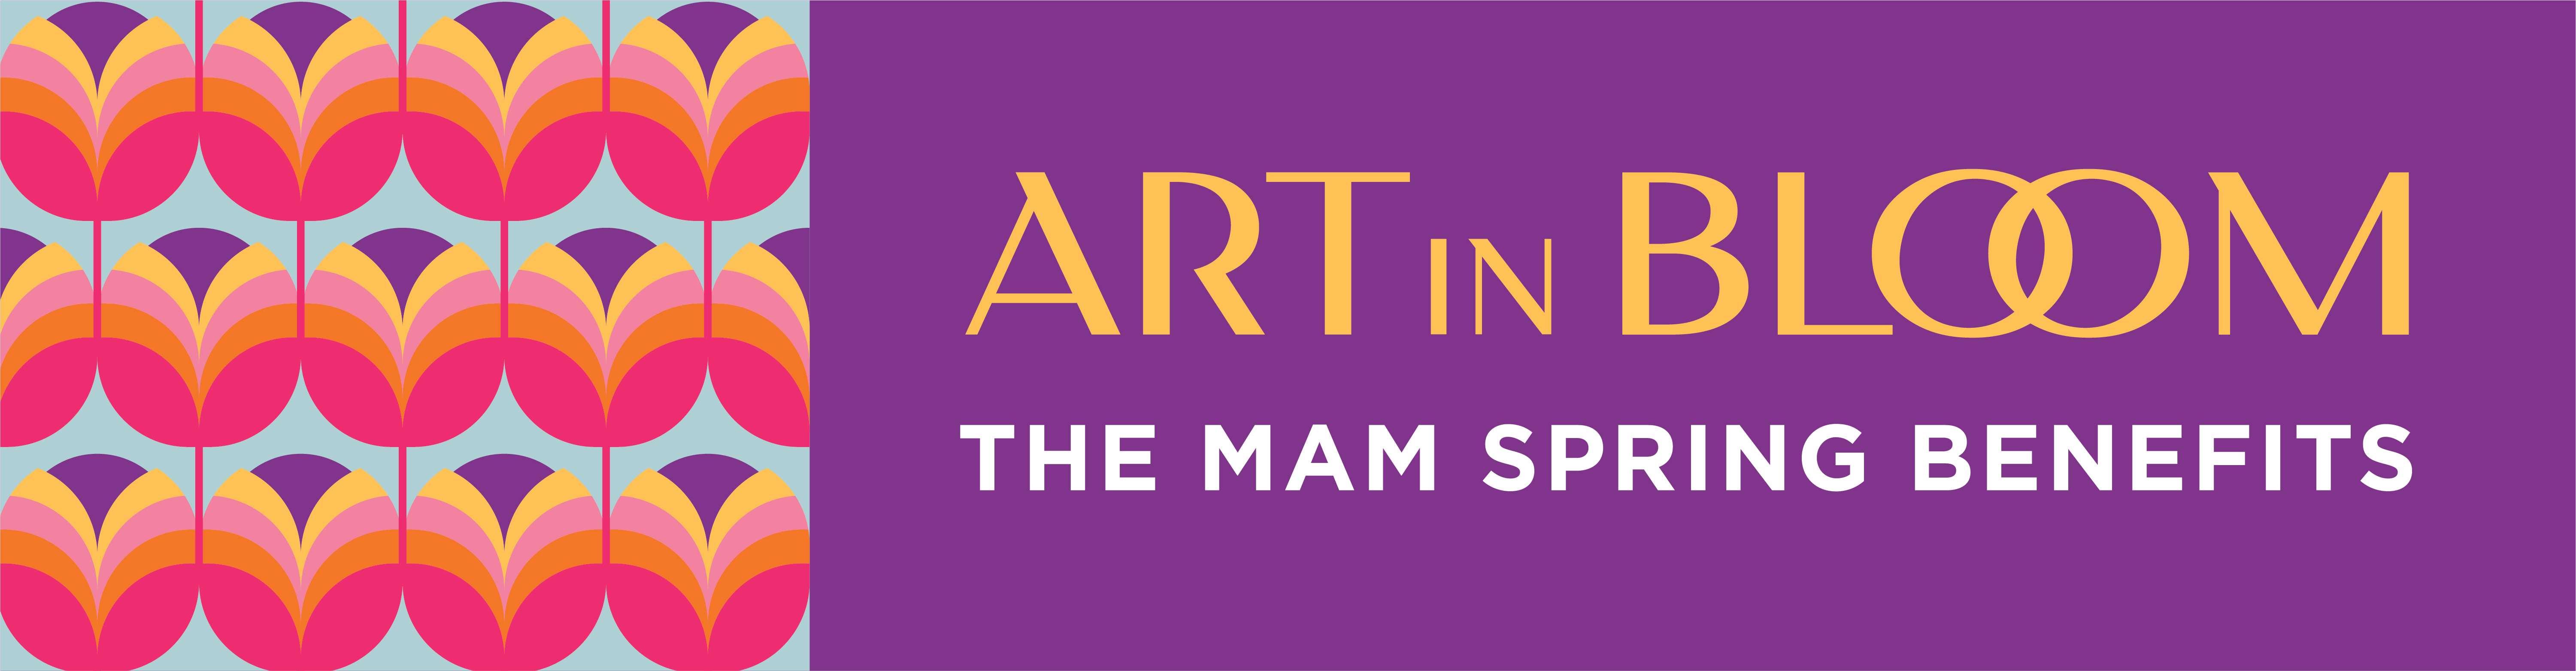 "Art in Bloom" (written in yellow text), "The MAM Spring Benefits" (written in white text) on a purple background